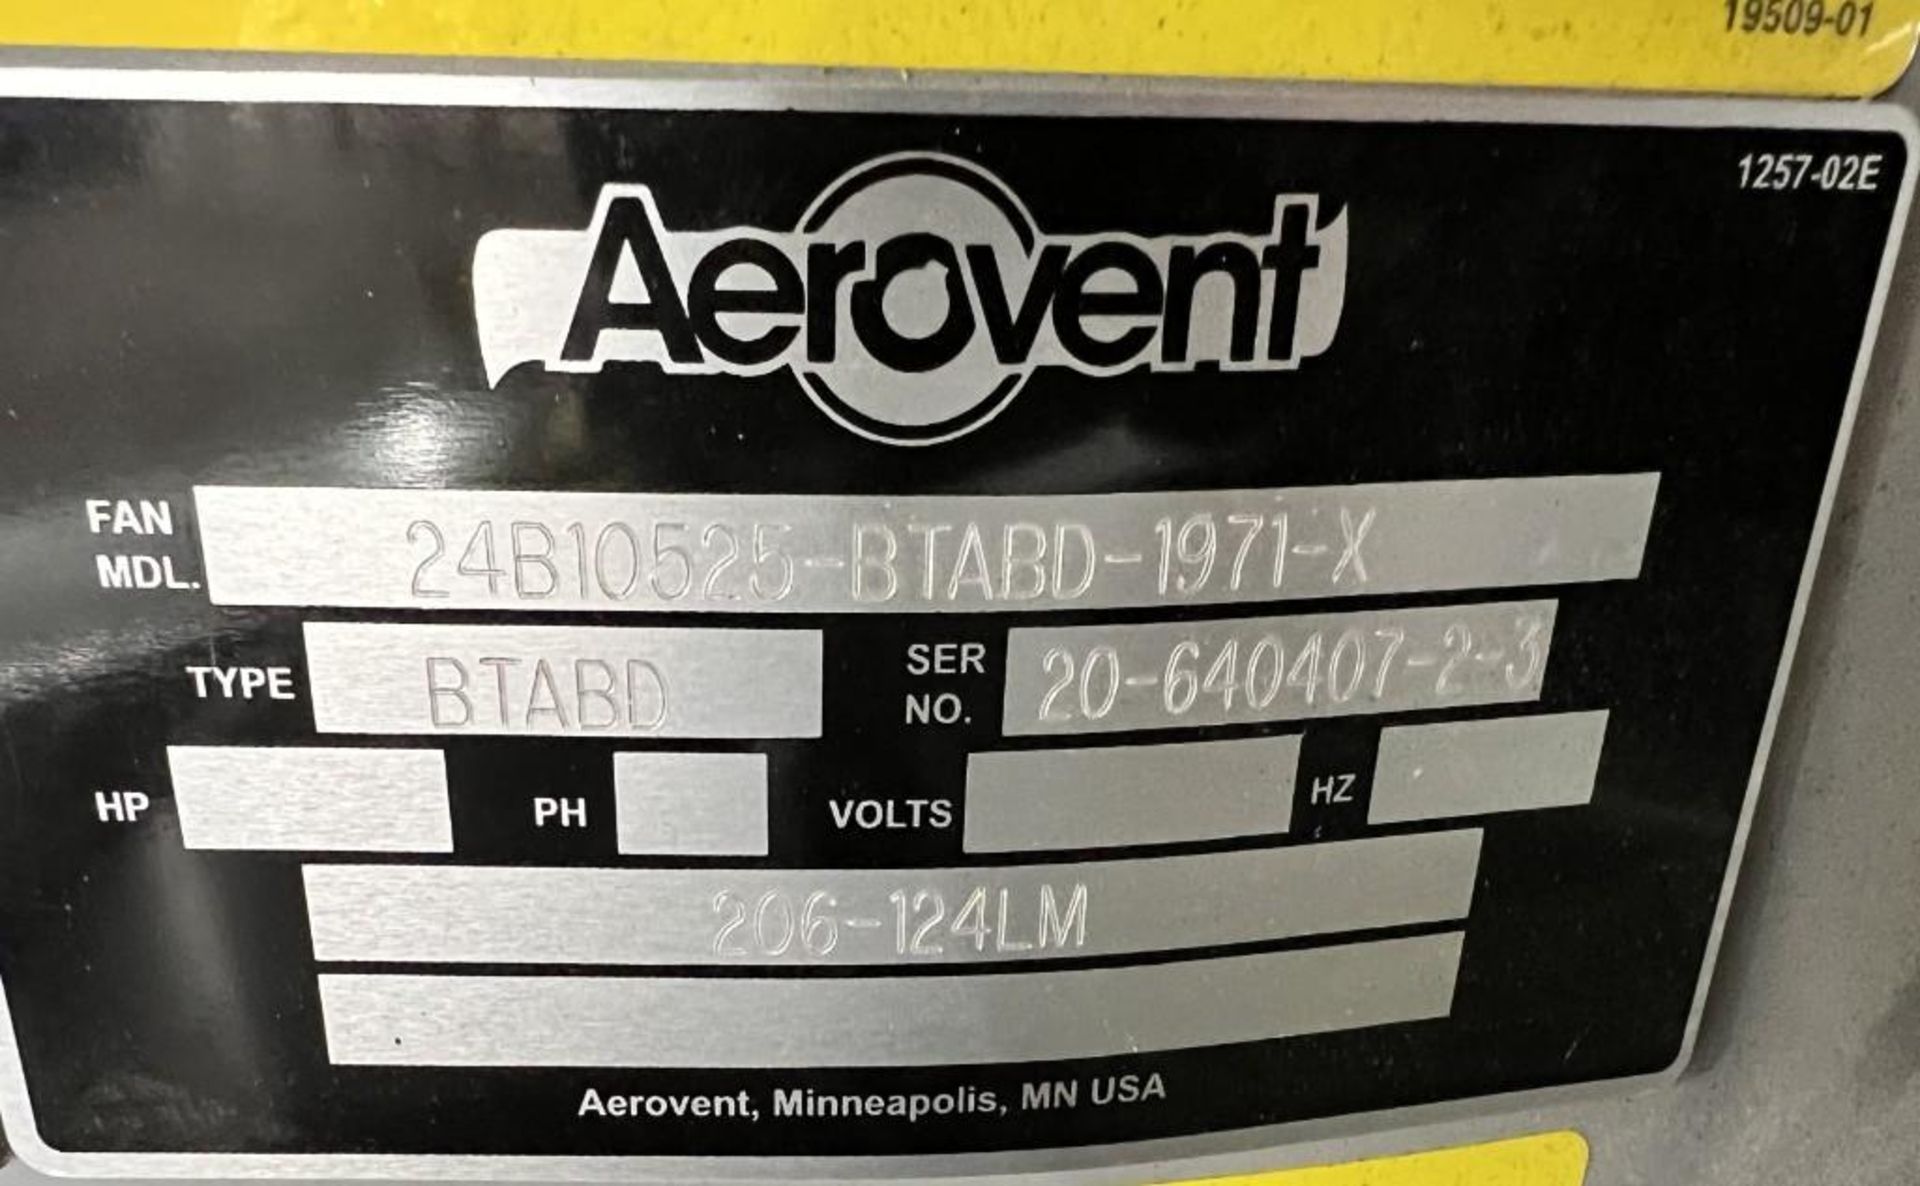 Lot Of (4) Aerovent Fans. With (2) model 24B10525-BTABD-1971-X, Serial# 20-640407-2-2 & 20-640407-2- - Image 8 of 12